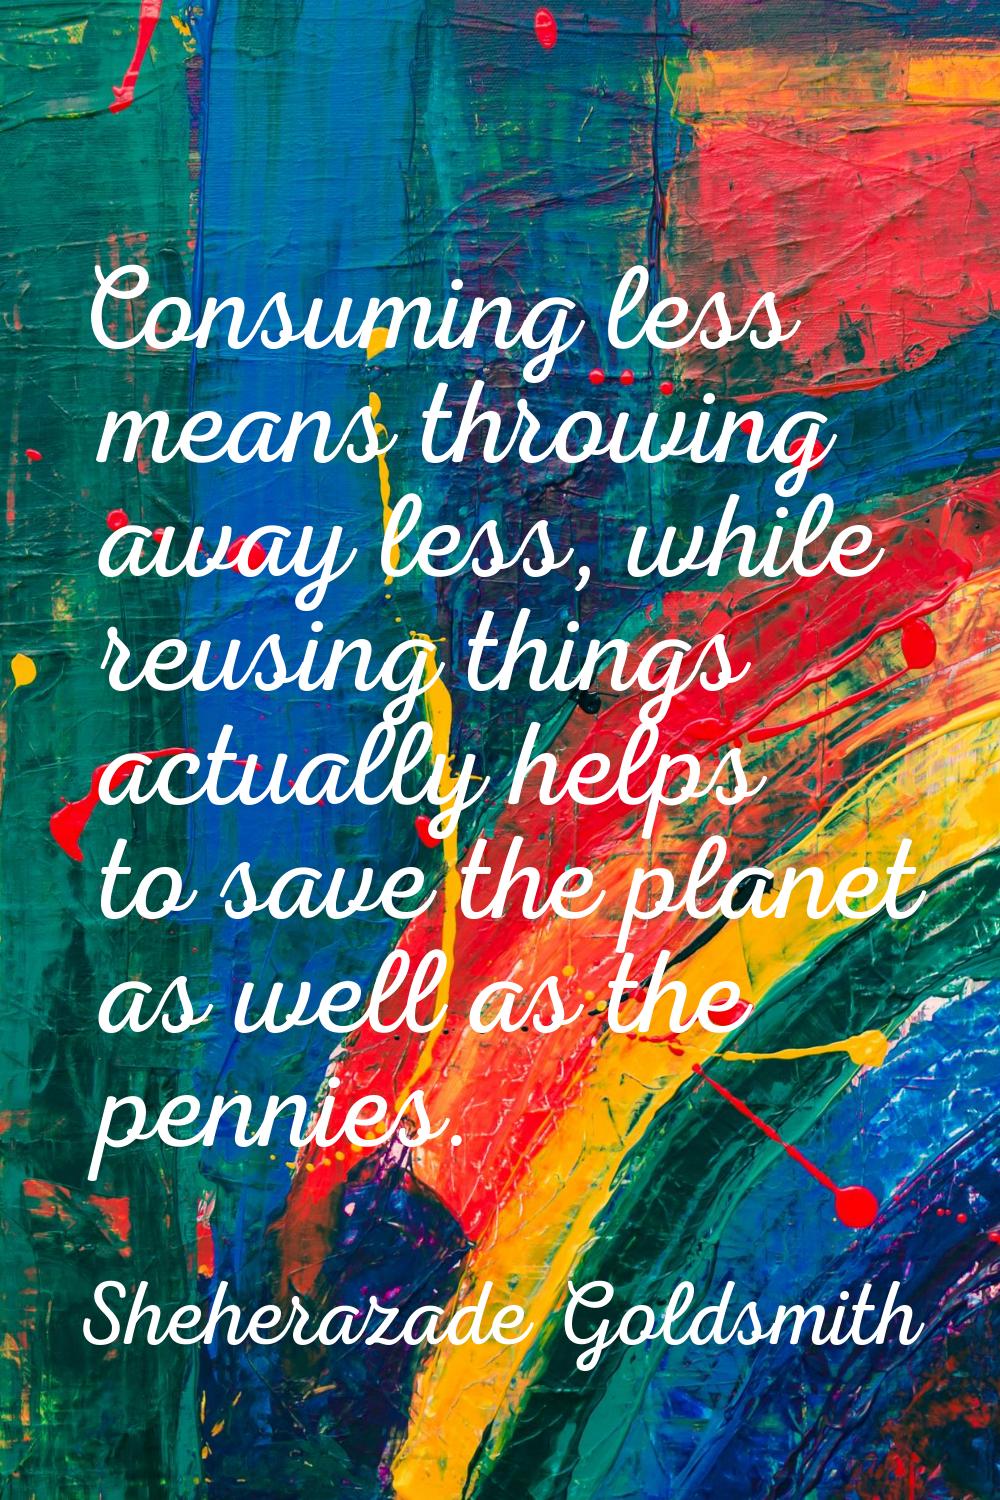 Consuming less means throwing away less, while reusing things actually helps to save the planet as 